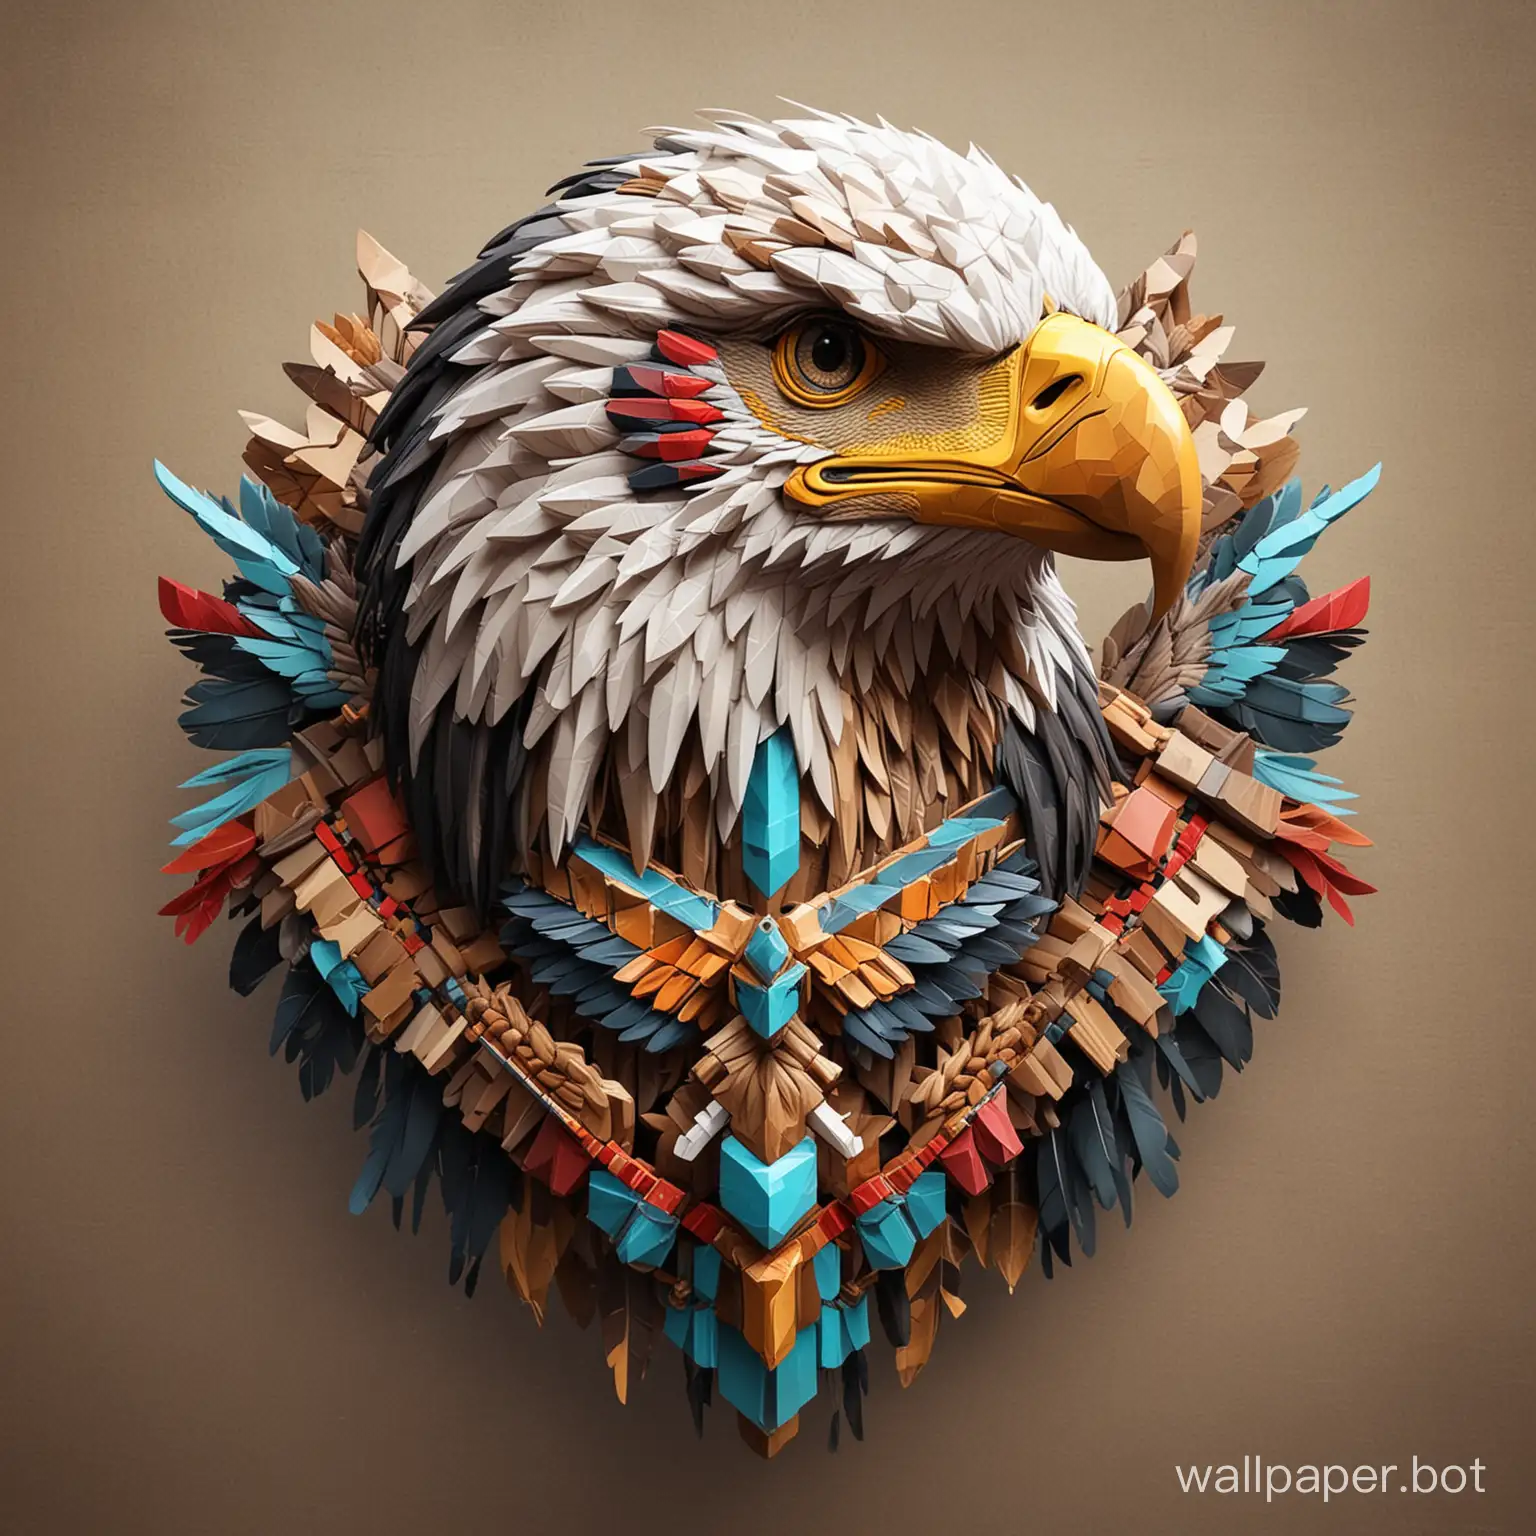 native spirit of eagle in cubic style